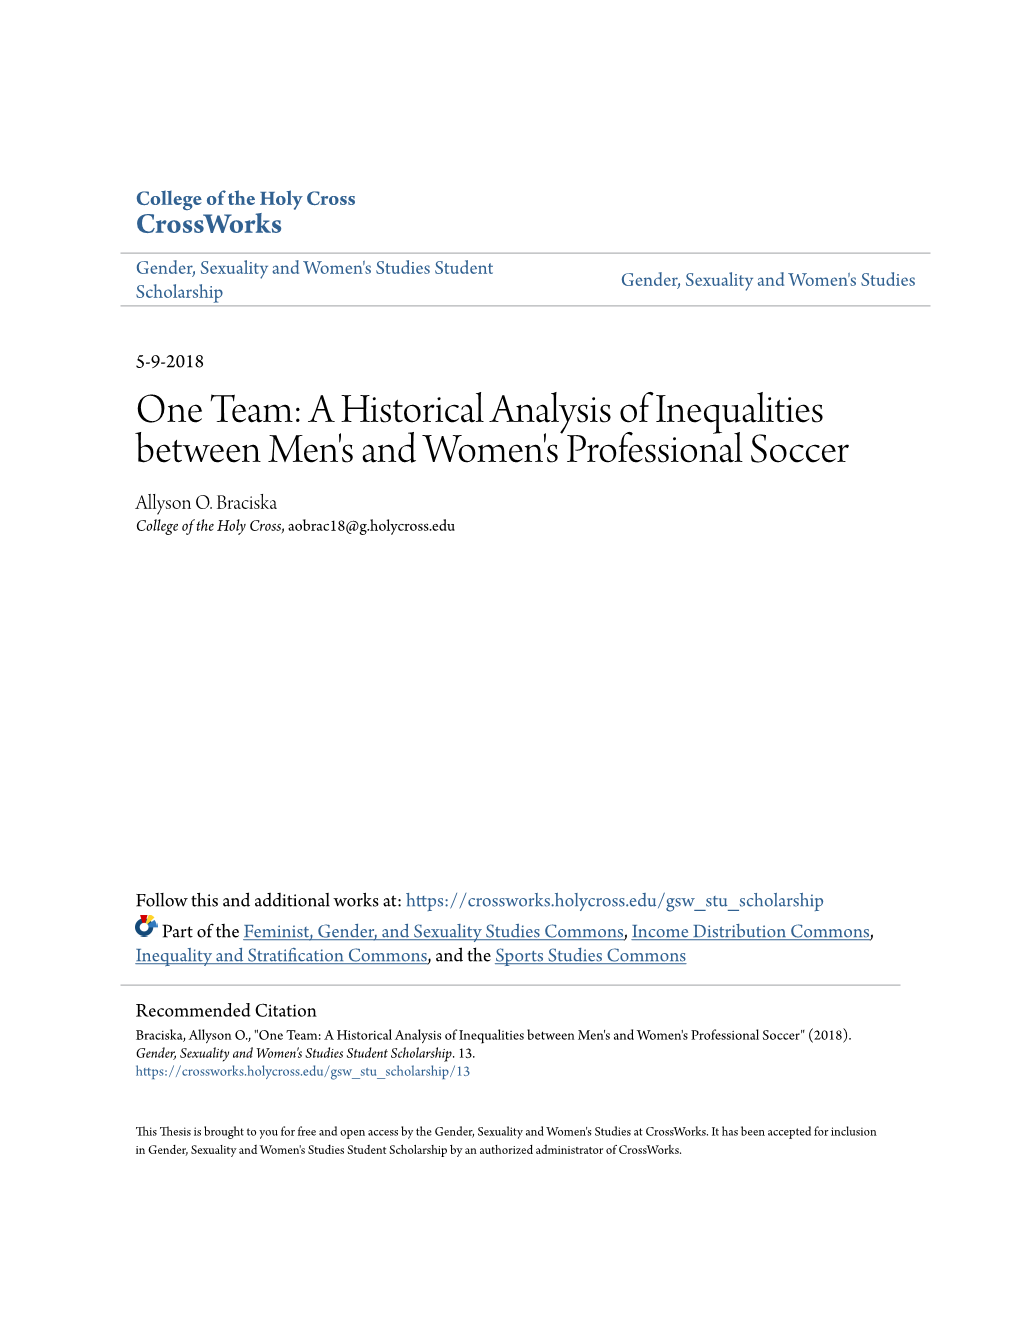 One Team: a Historical Analysis of Inequalities Between Men's and Women's Professional Soccer Allyson O